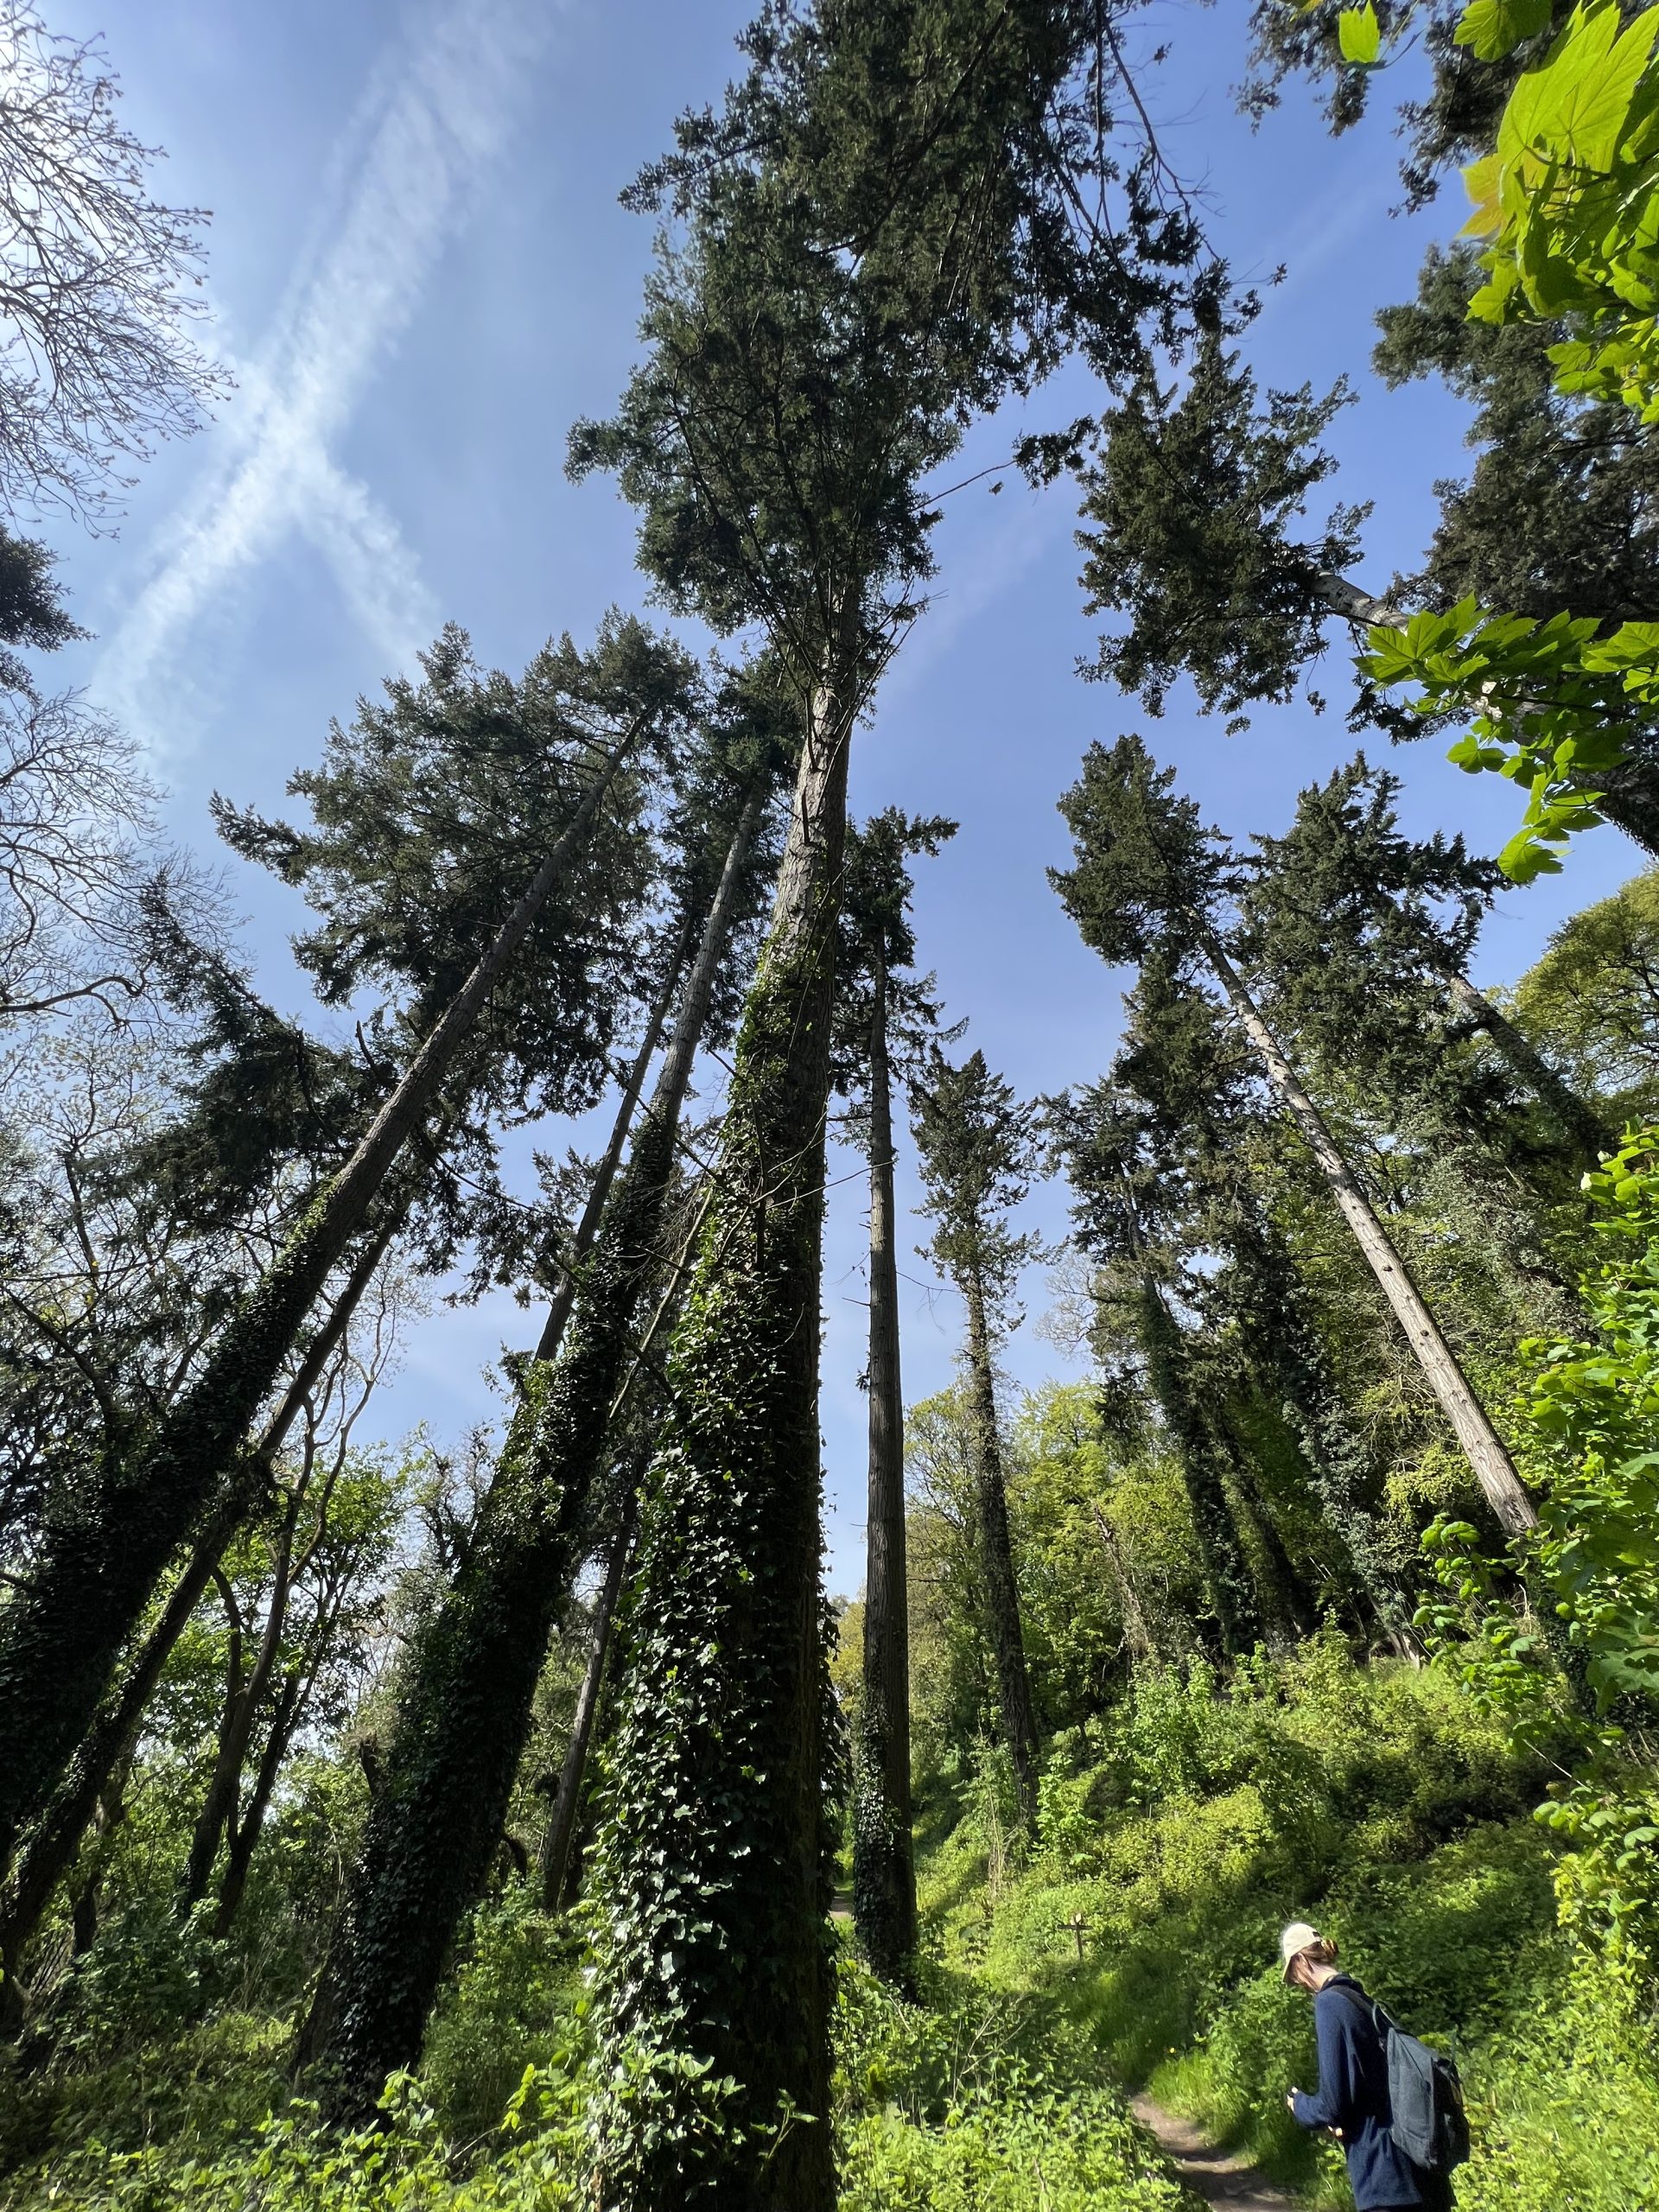 The incredible tall trees of Horner Woods, Exmoor